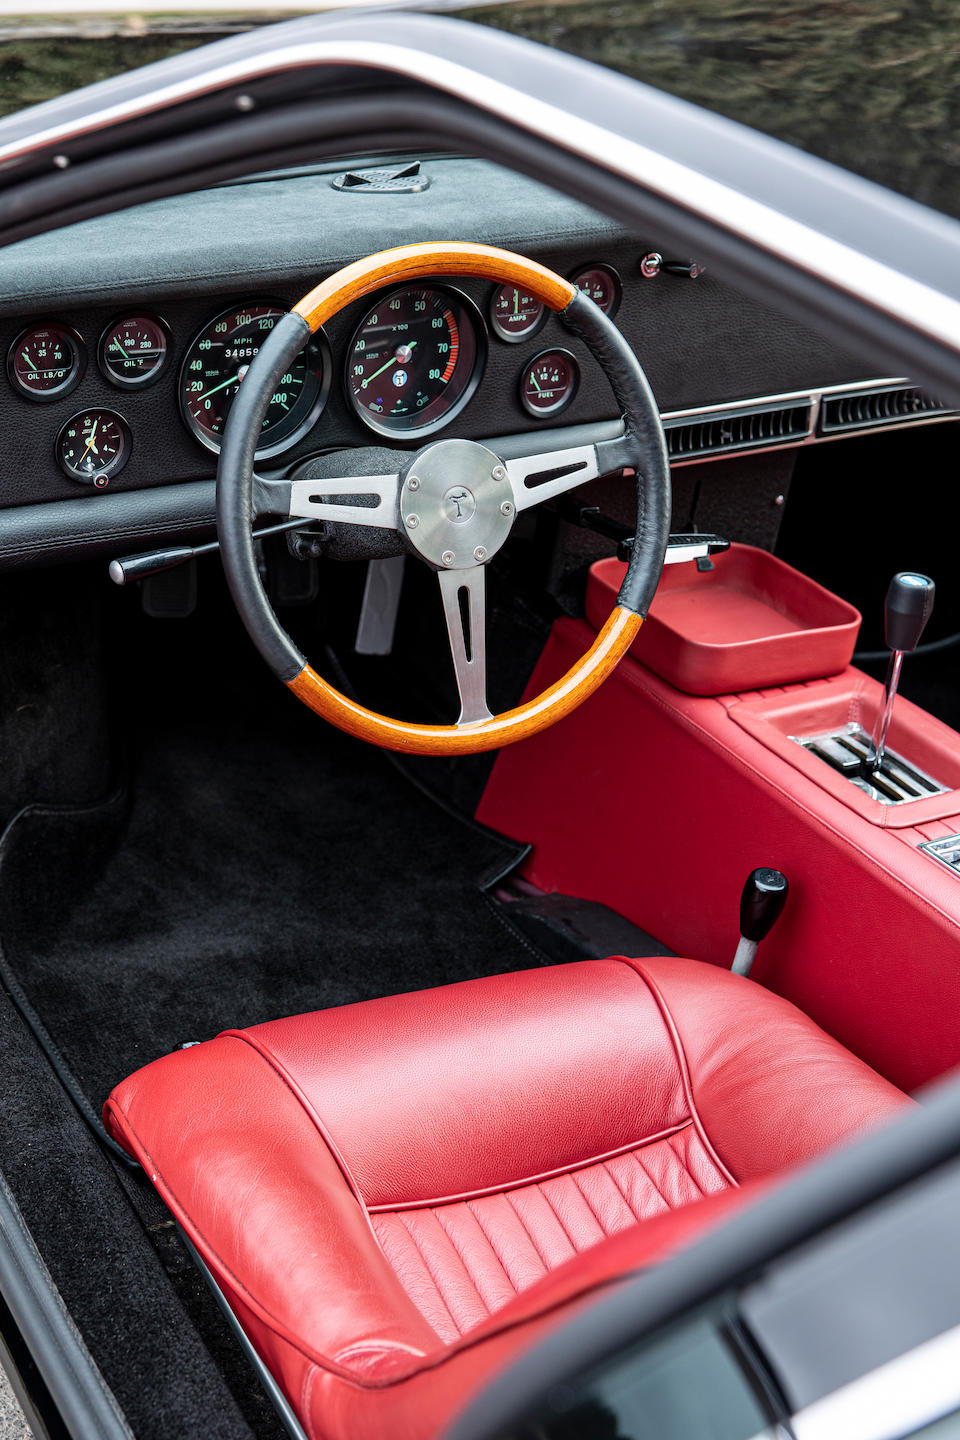 Restored to concours condition,1969 De Tomaso Mangusta Coup&#233;  Chassis no. 8MA 0994